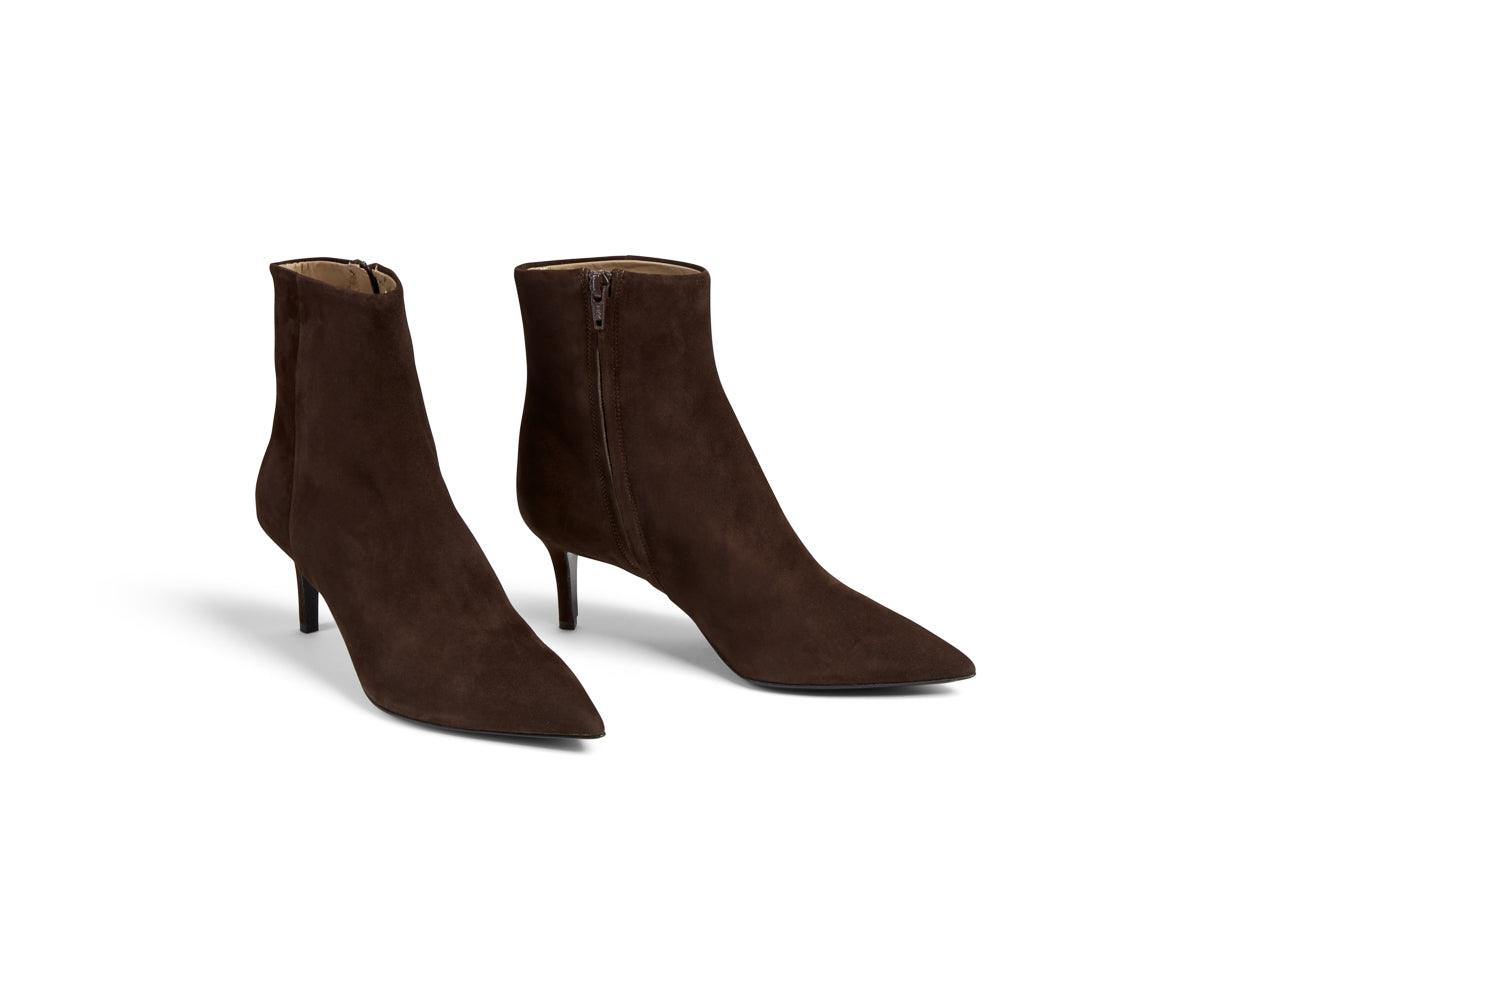 Oscar Brown Suede Ankle Boot - MADE THE EDIT